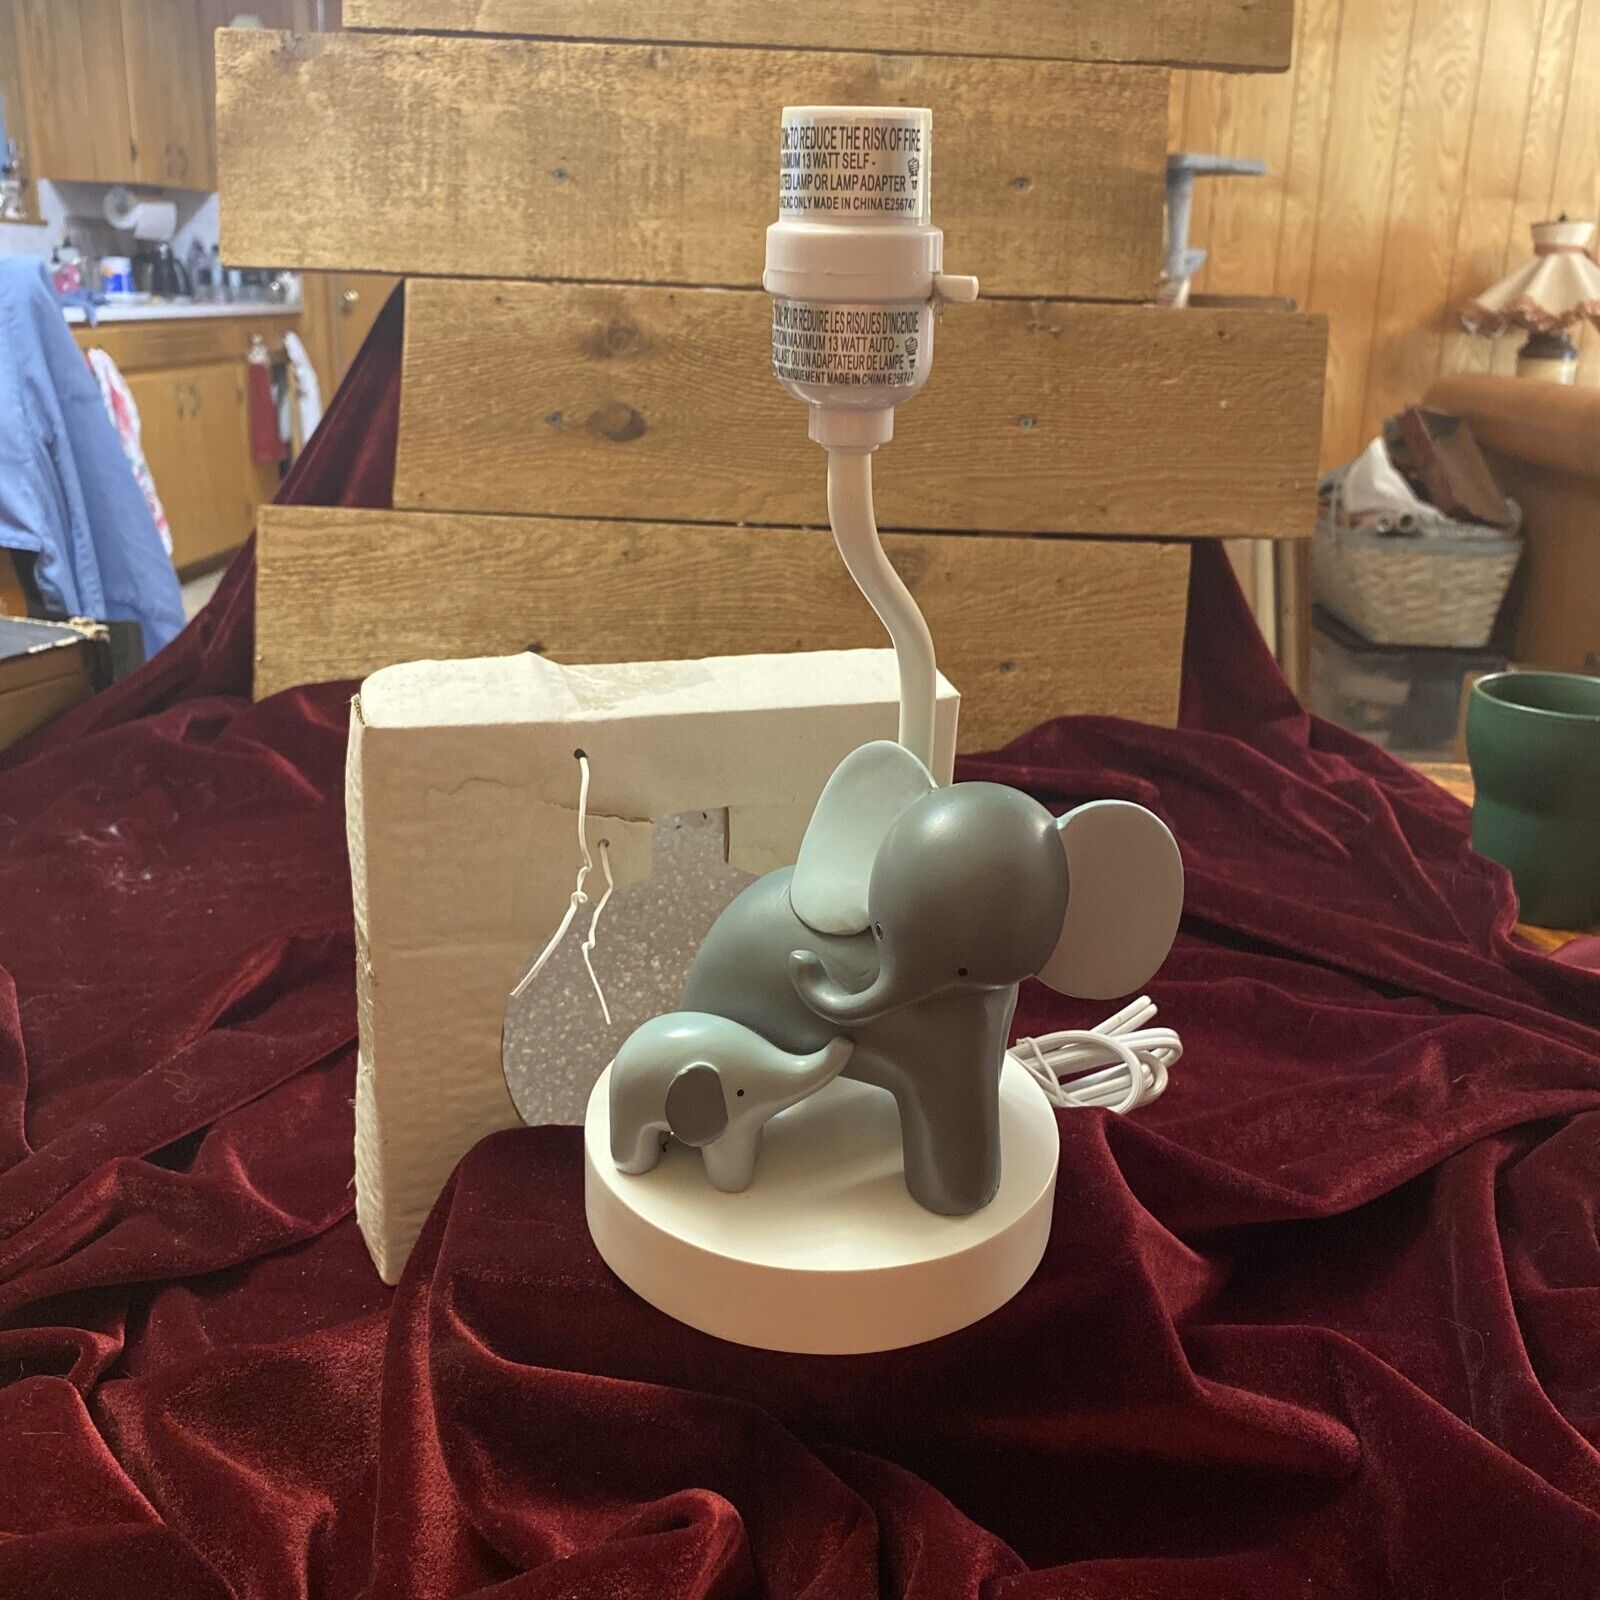 Me And Mama White/gray Elephant Nursery Lamp By Lamps & Ivy Missing Shade